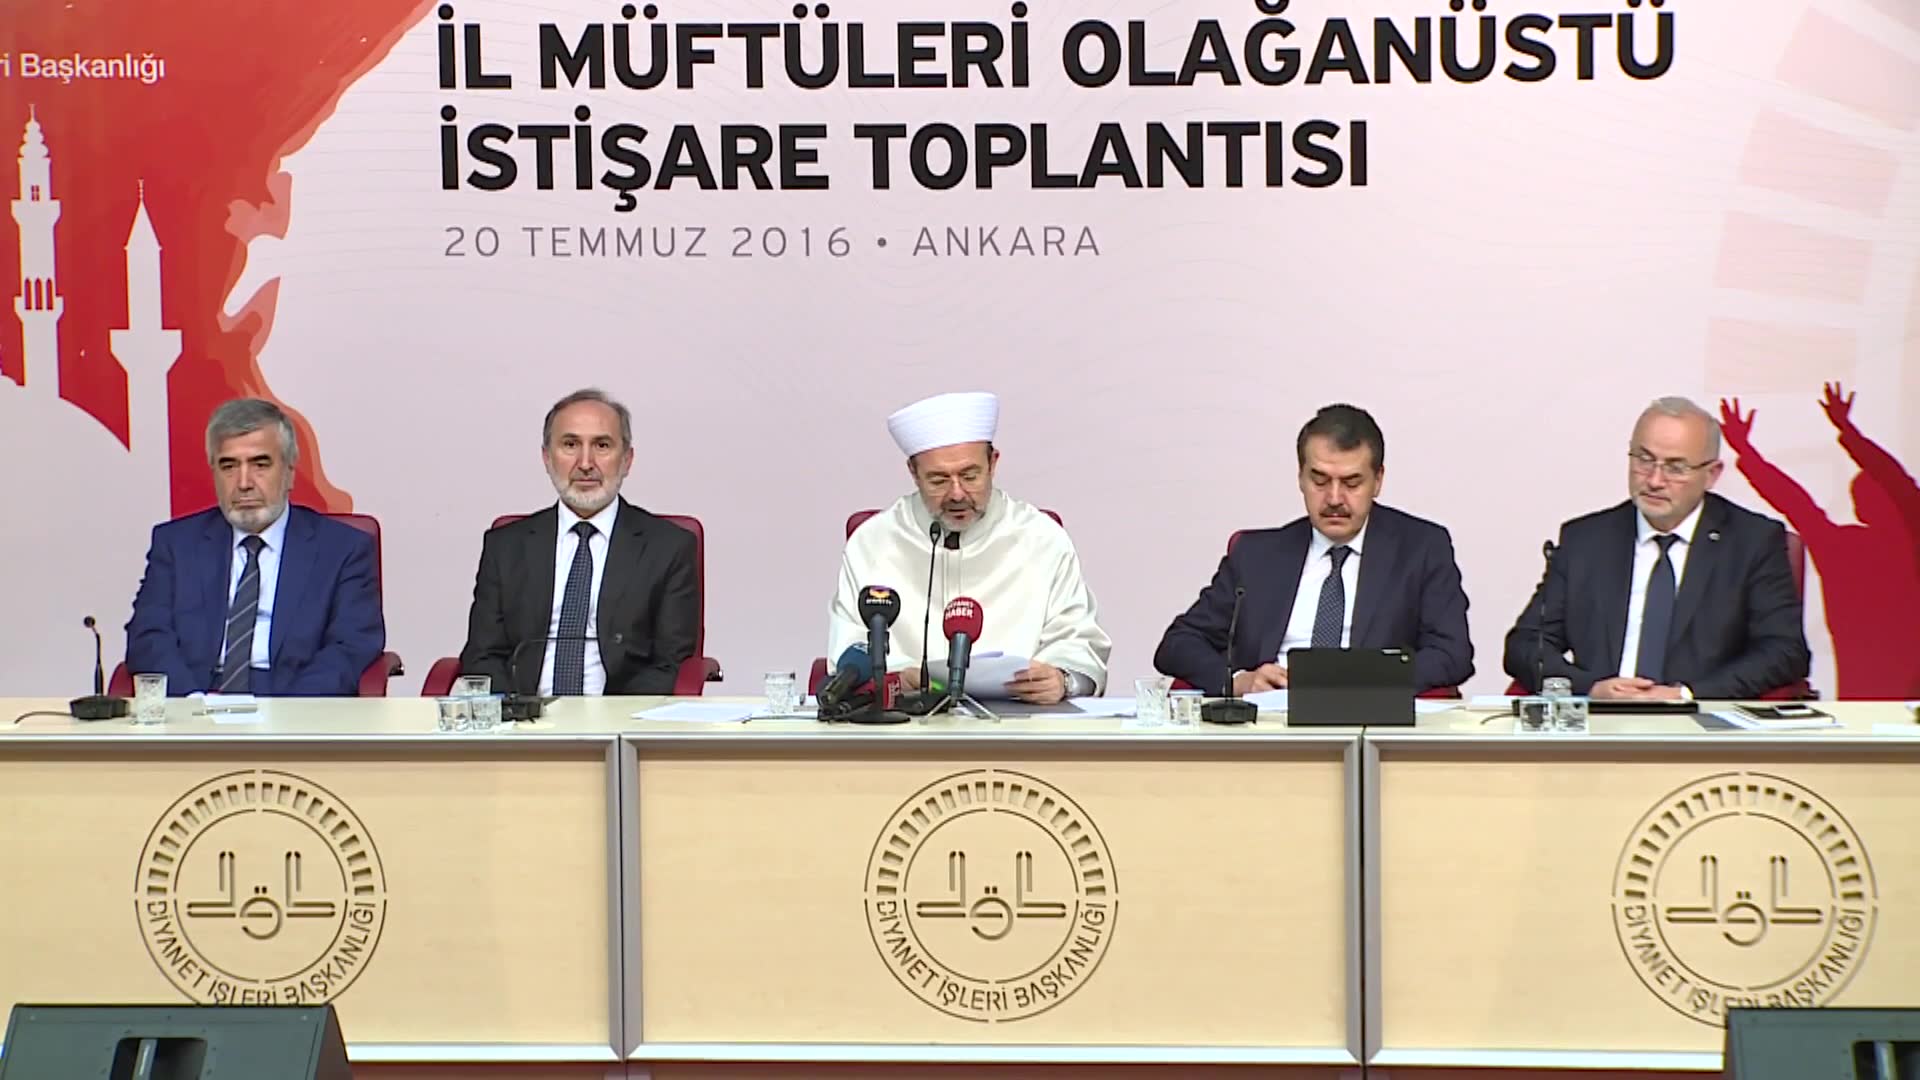 The Day is a Day of Unity Extraordinary Consultation Meeting of Provincial Muftis Final Declaration